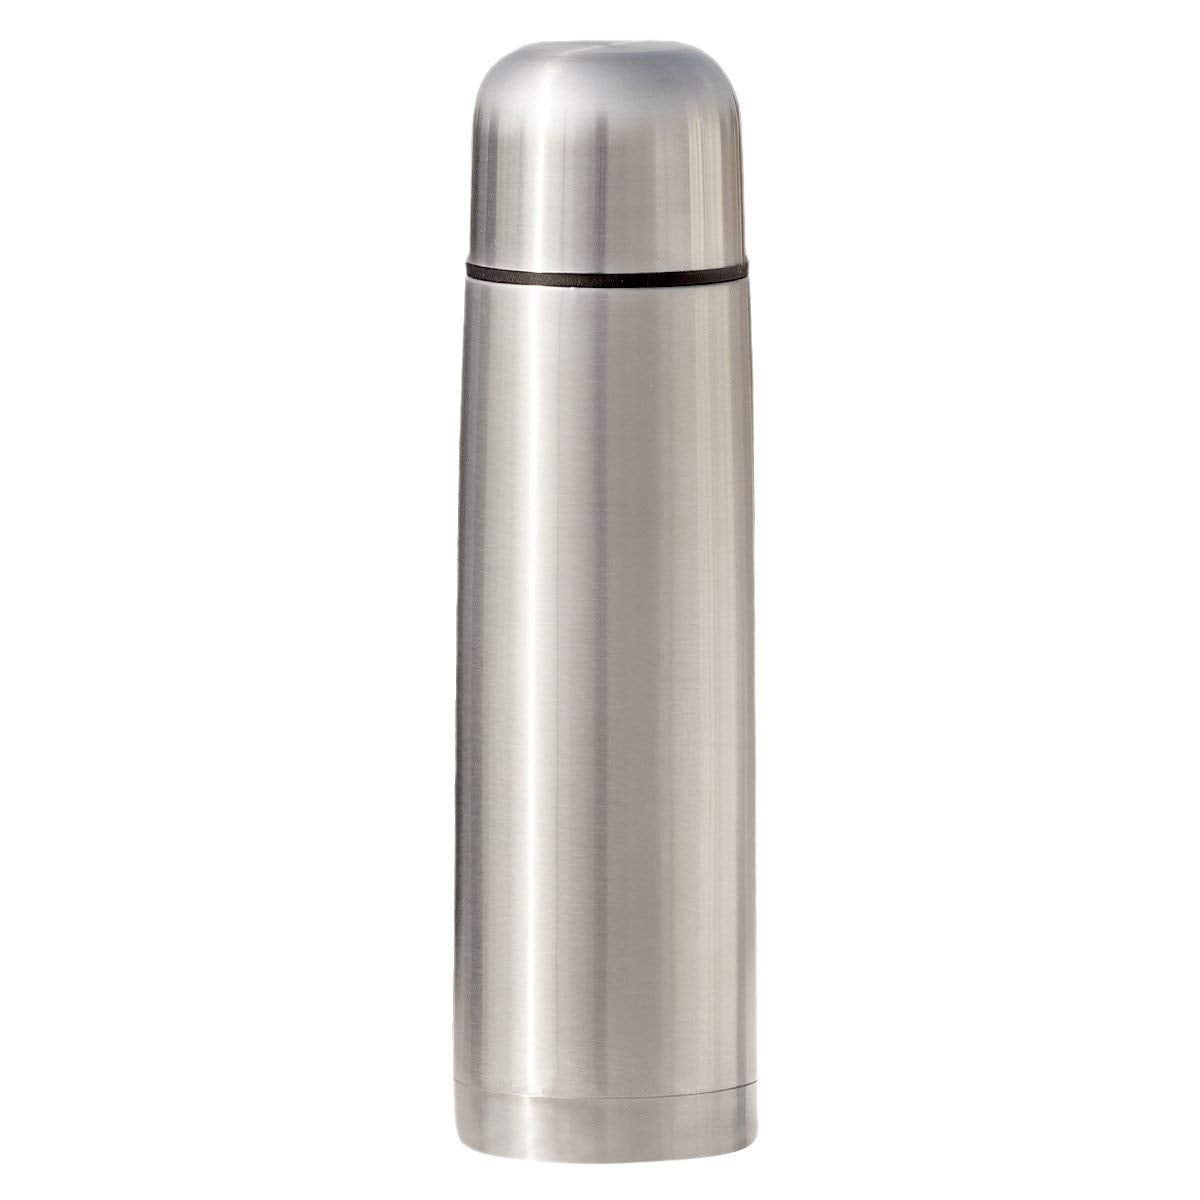 Stainless Steel Double layer Thermos travel Mug for Hot and Cold Coffee drinks 